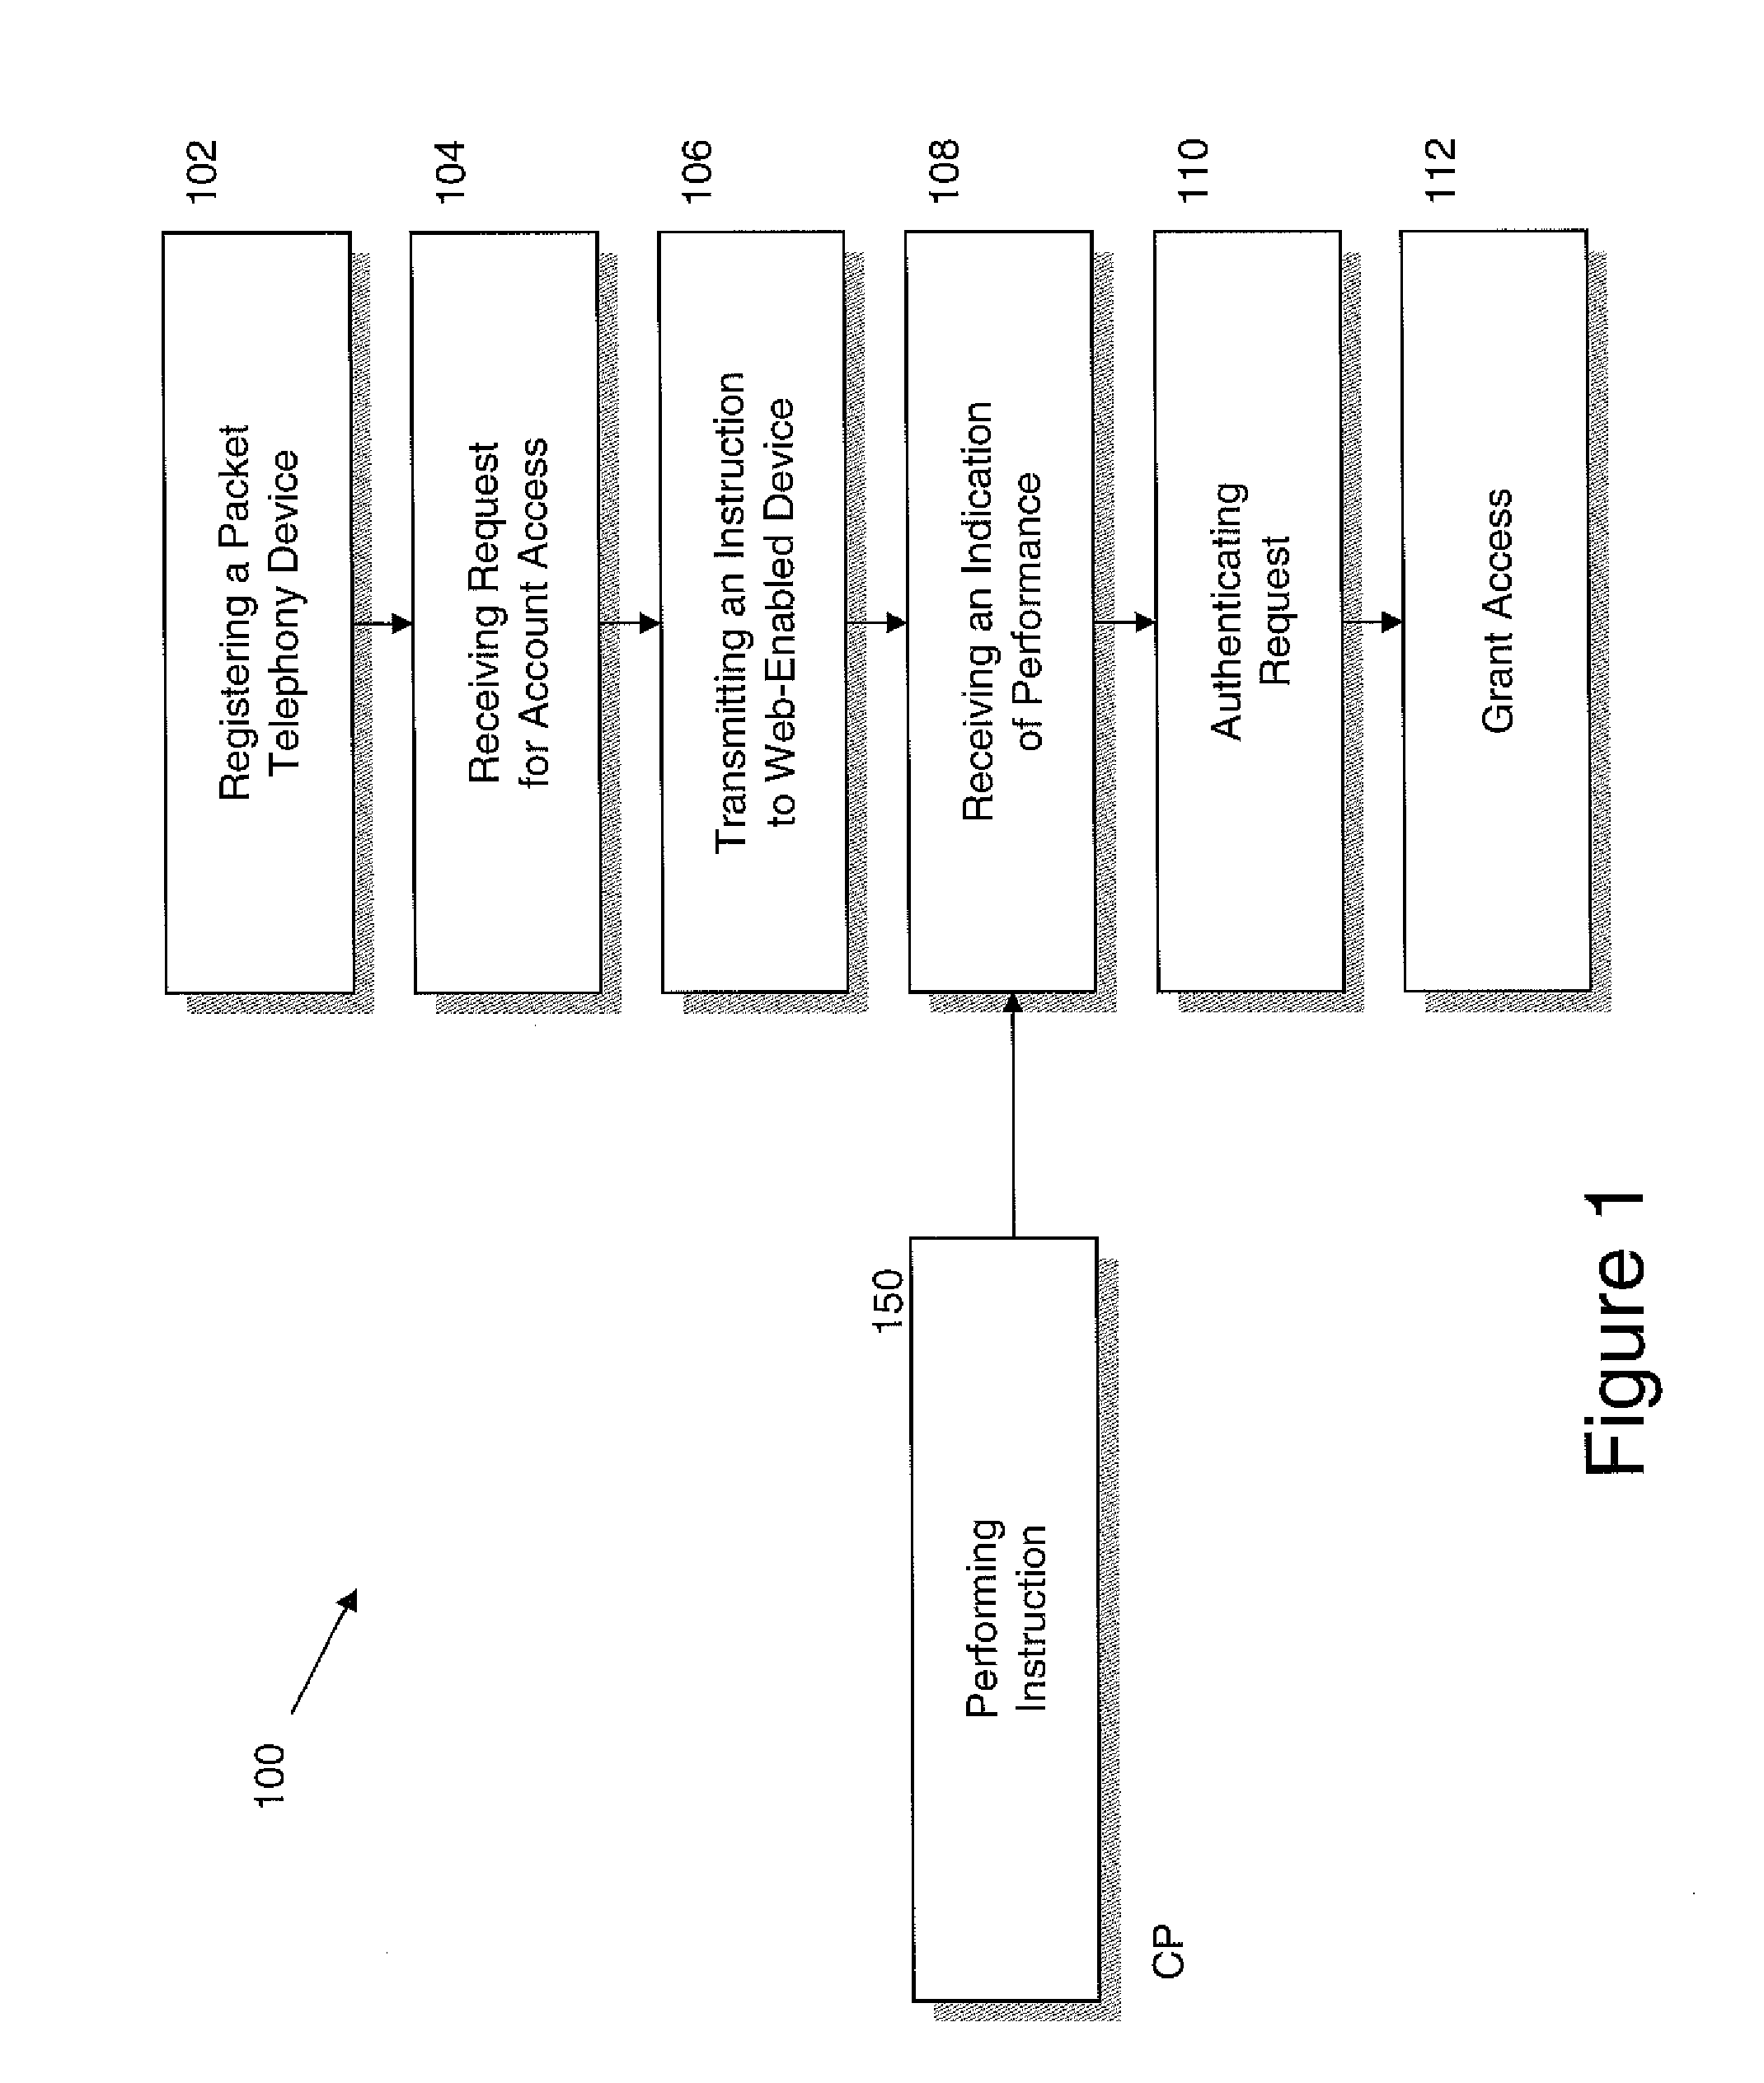 Authentication systems and methods using a packet telephony device